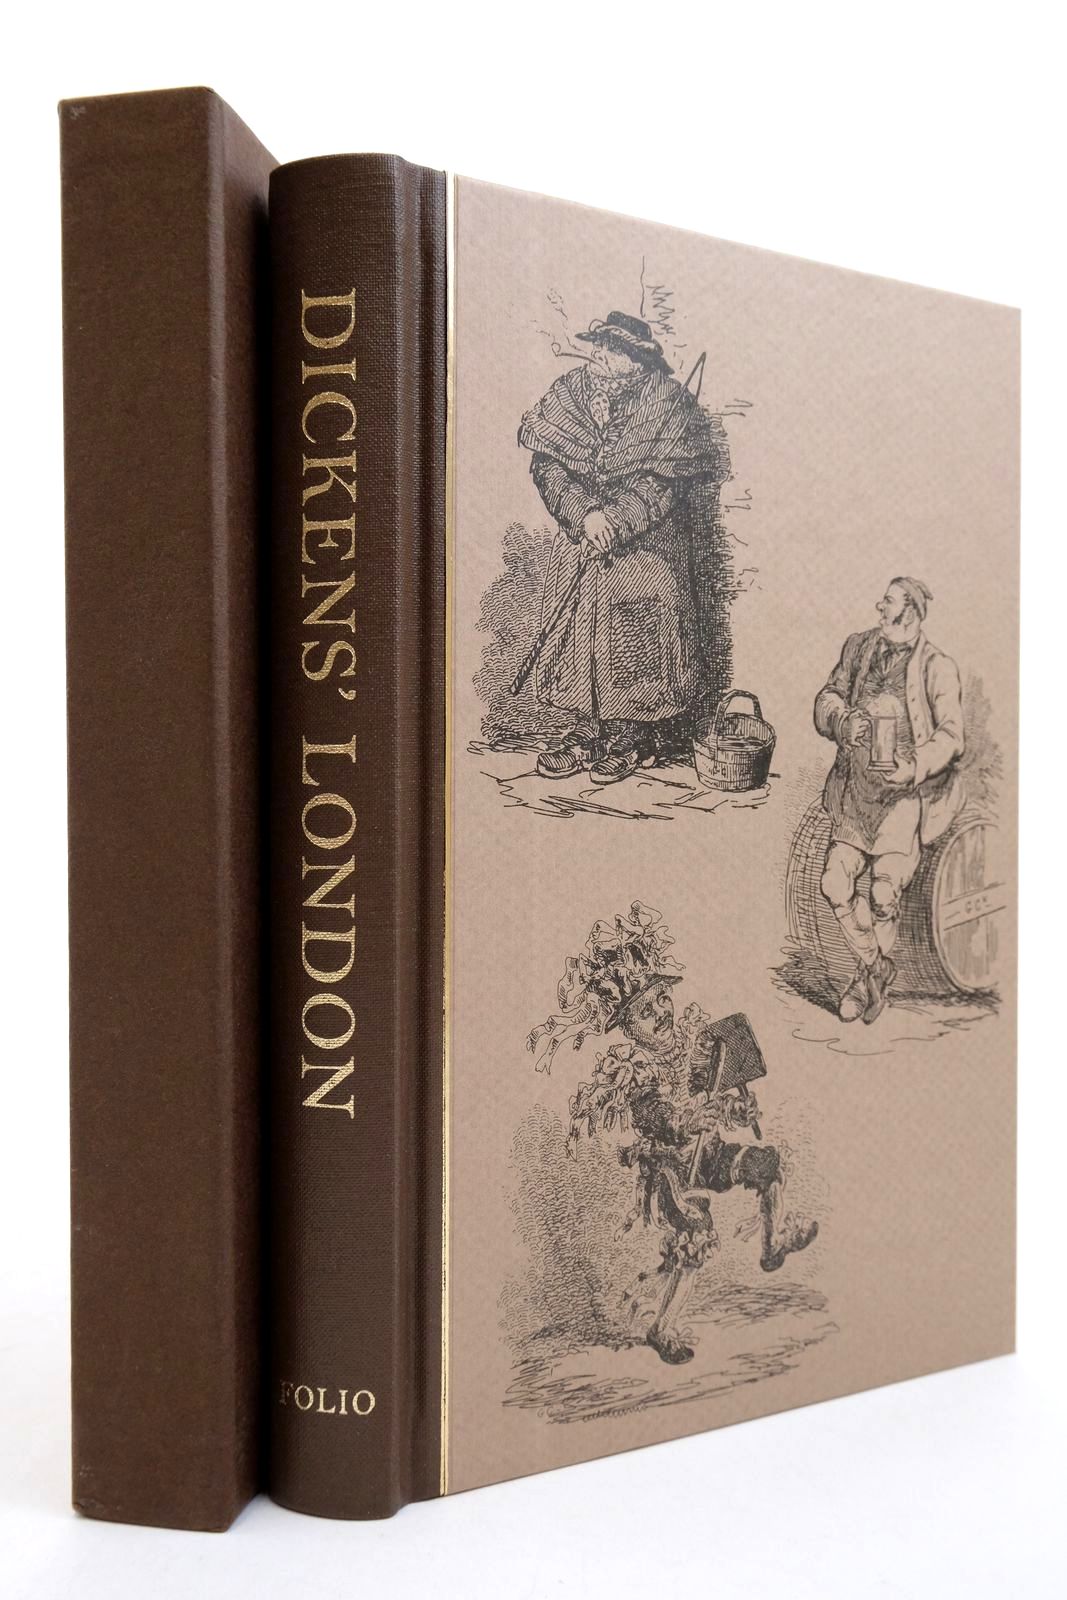 Photo of DICKENS' LONDON written by Dickens, Charles
Vallance, Rosalind illustrated by Cruikshank, George published by Folio Society (STOCK CODE: 2140234)  for sale by Stella & Rose's Books